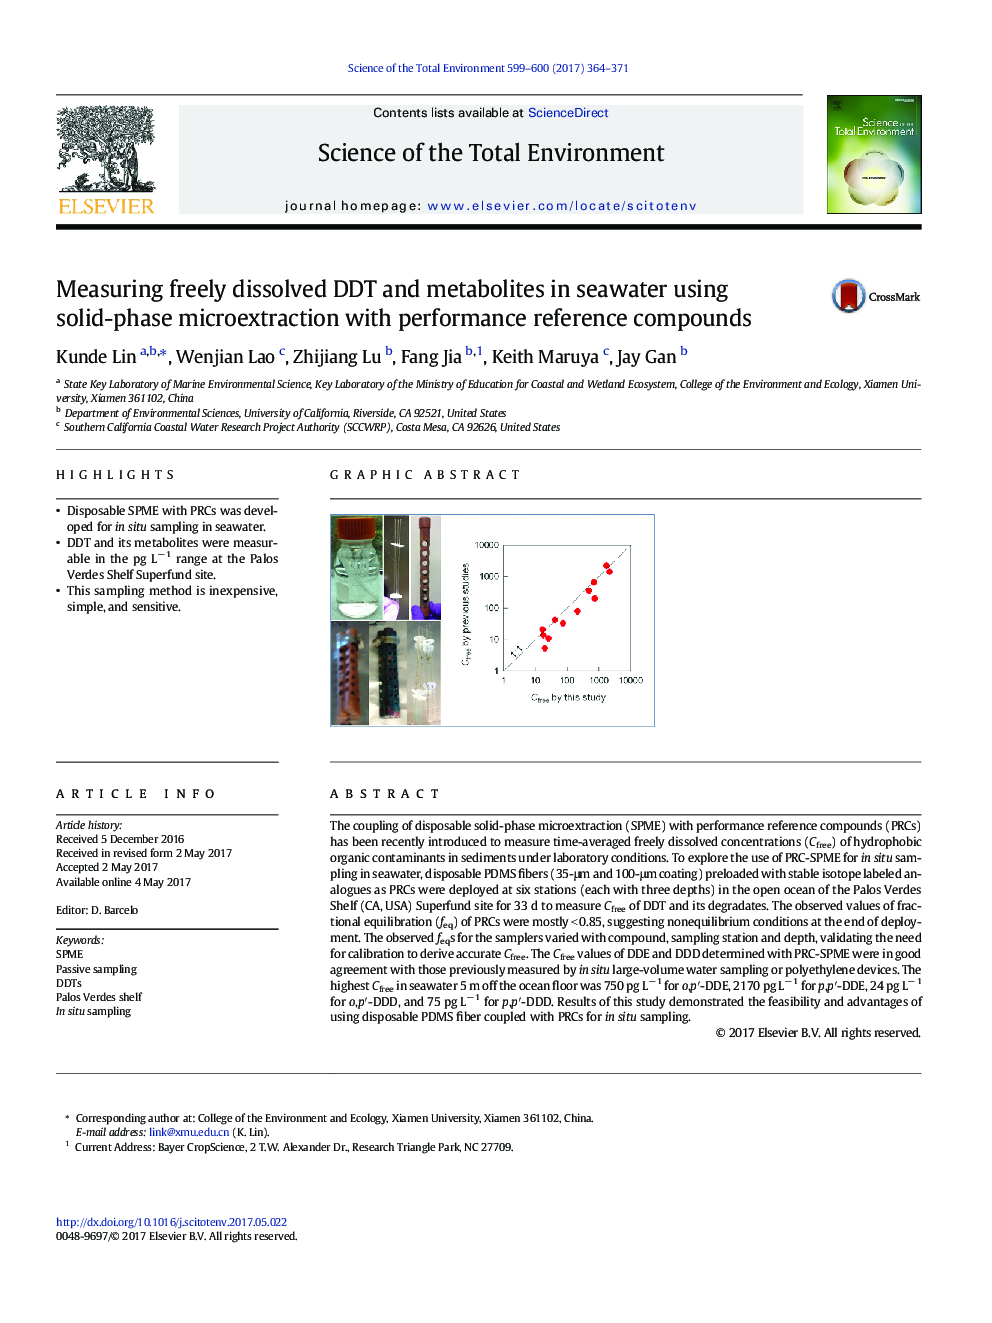 Measuring freely dissolved DDT and metabolites in seawater using solid-phase microextraction with performance reference compounds